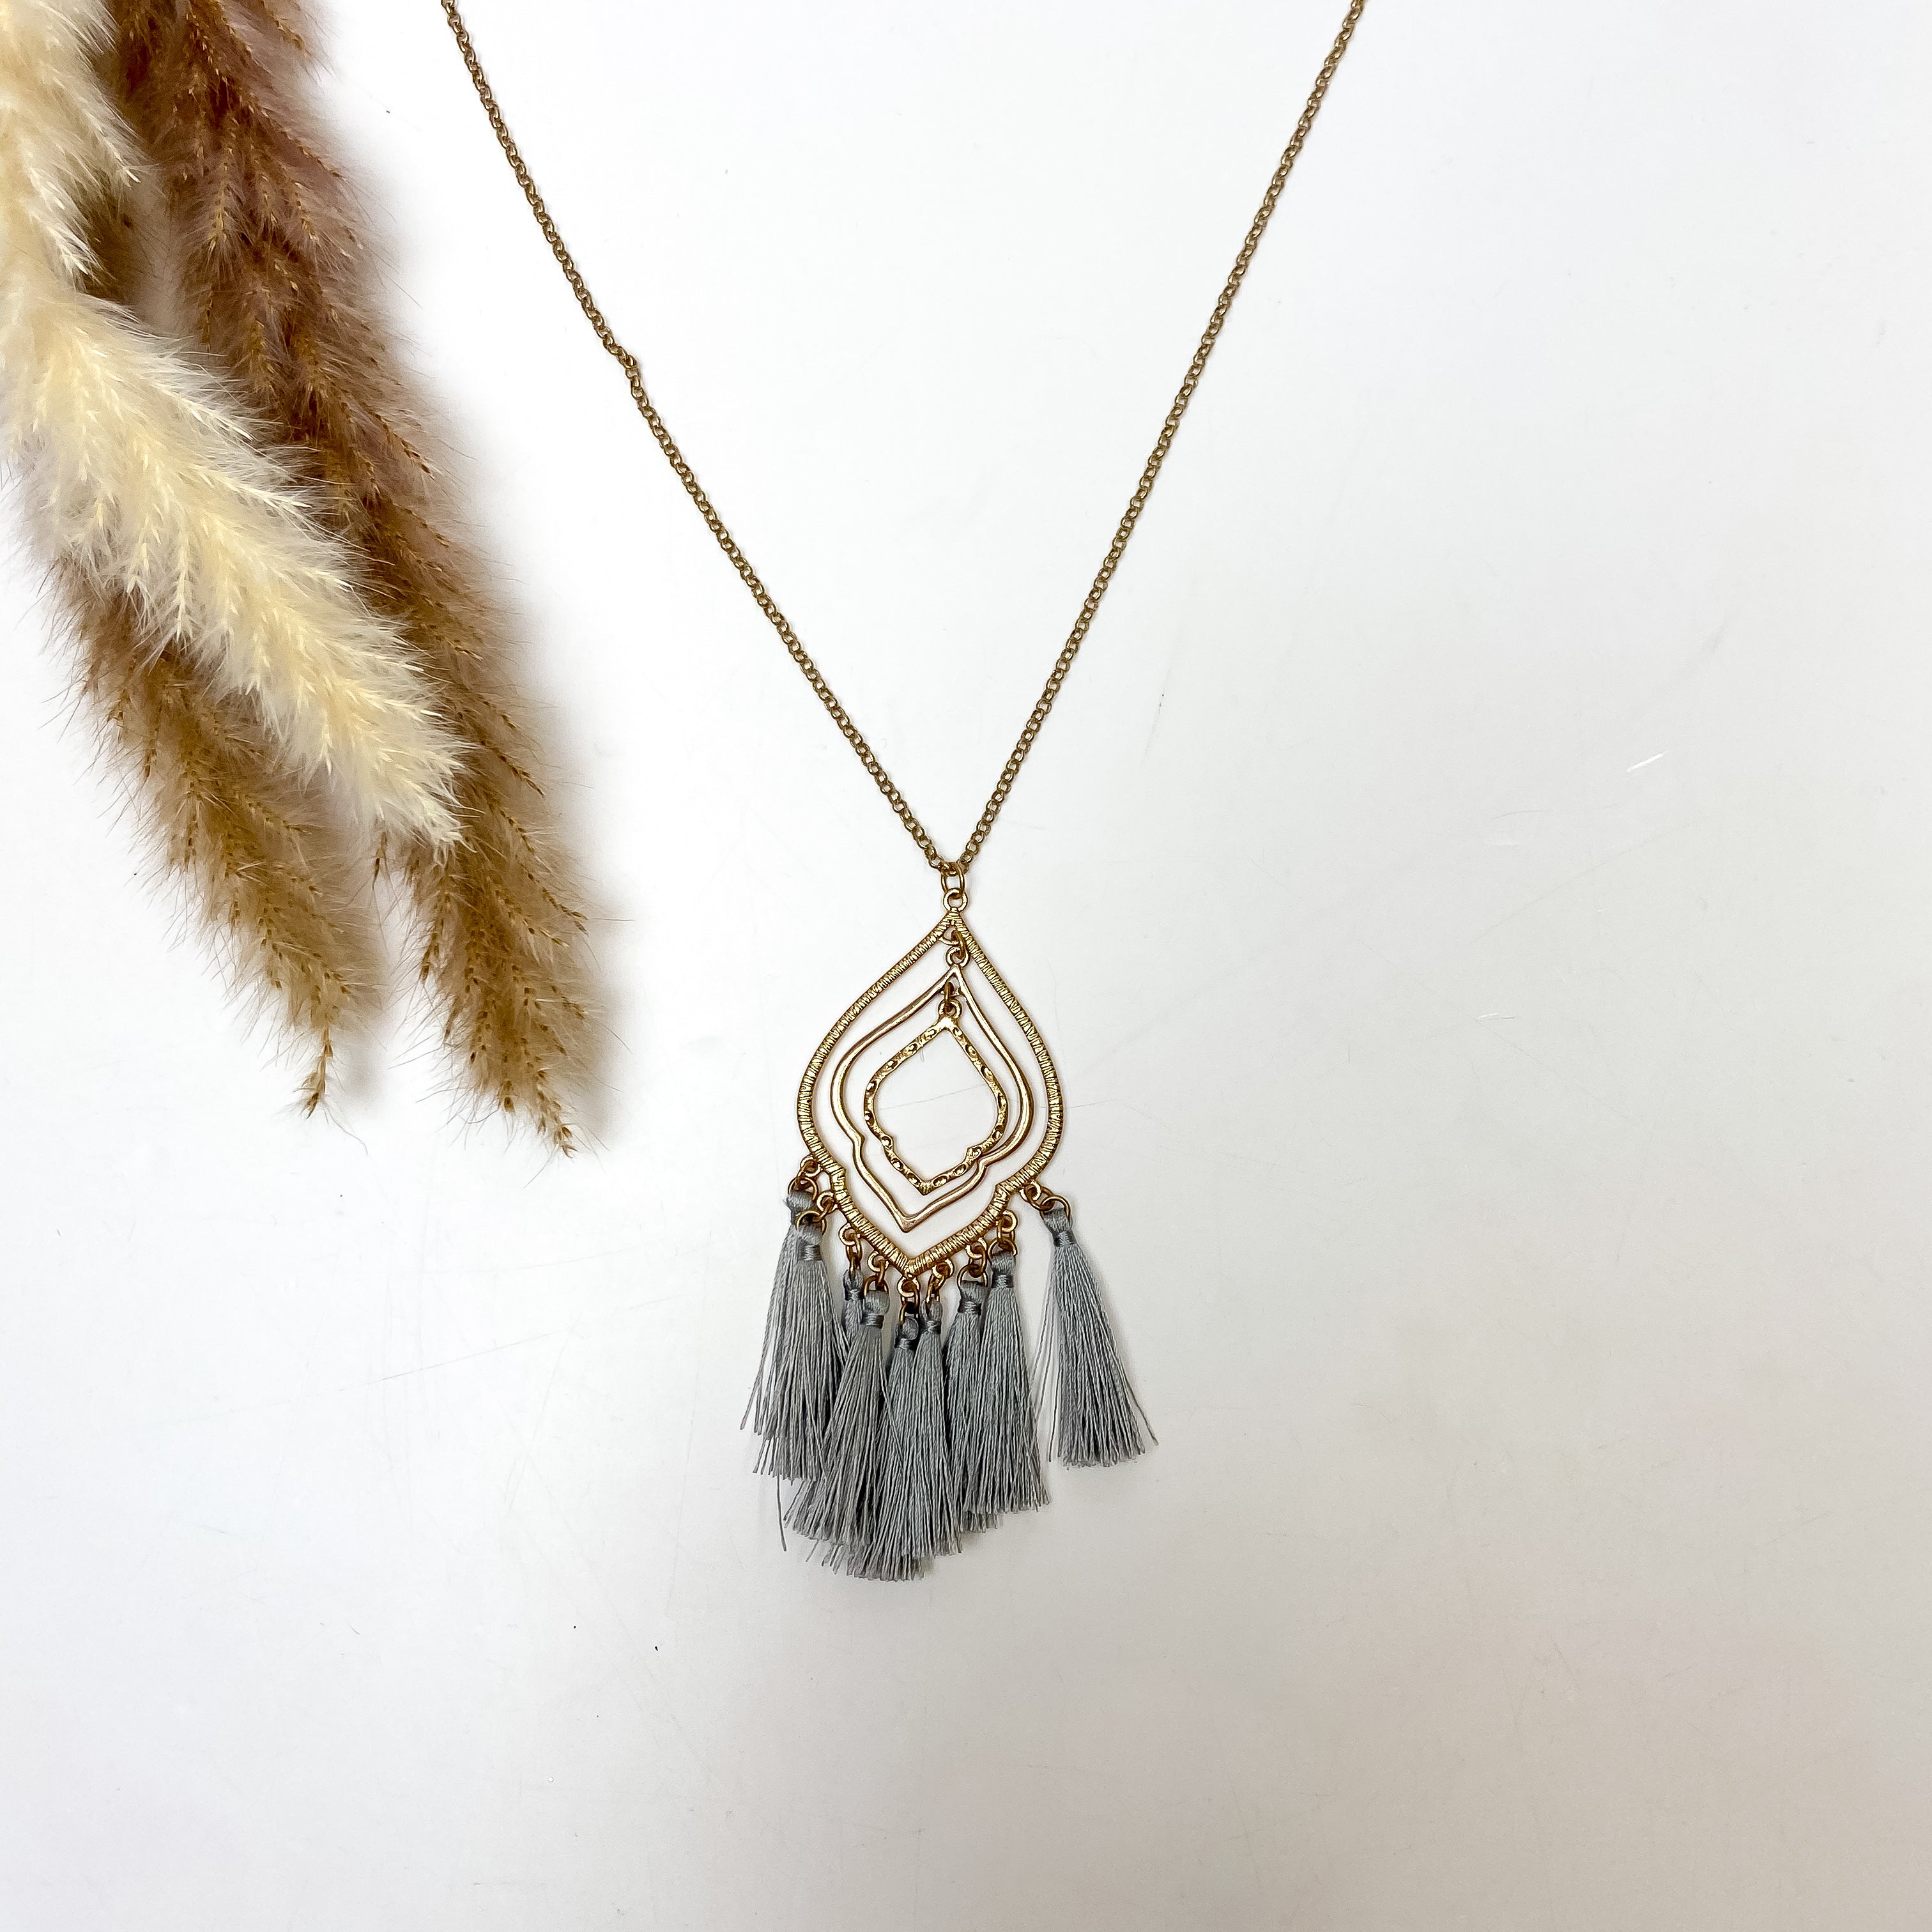 Three Layer Gold Tone Quatrefoil Pendant Necklace with Tassels in Slate Gray